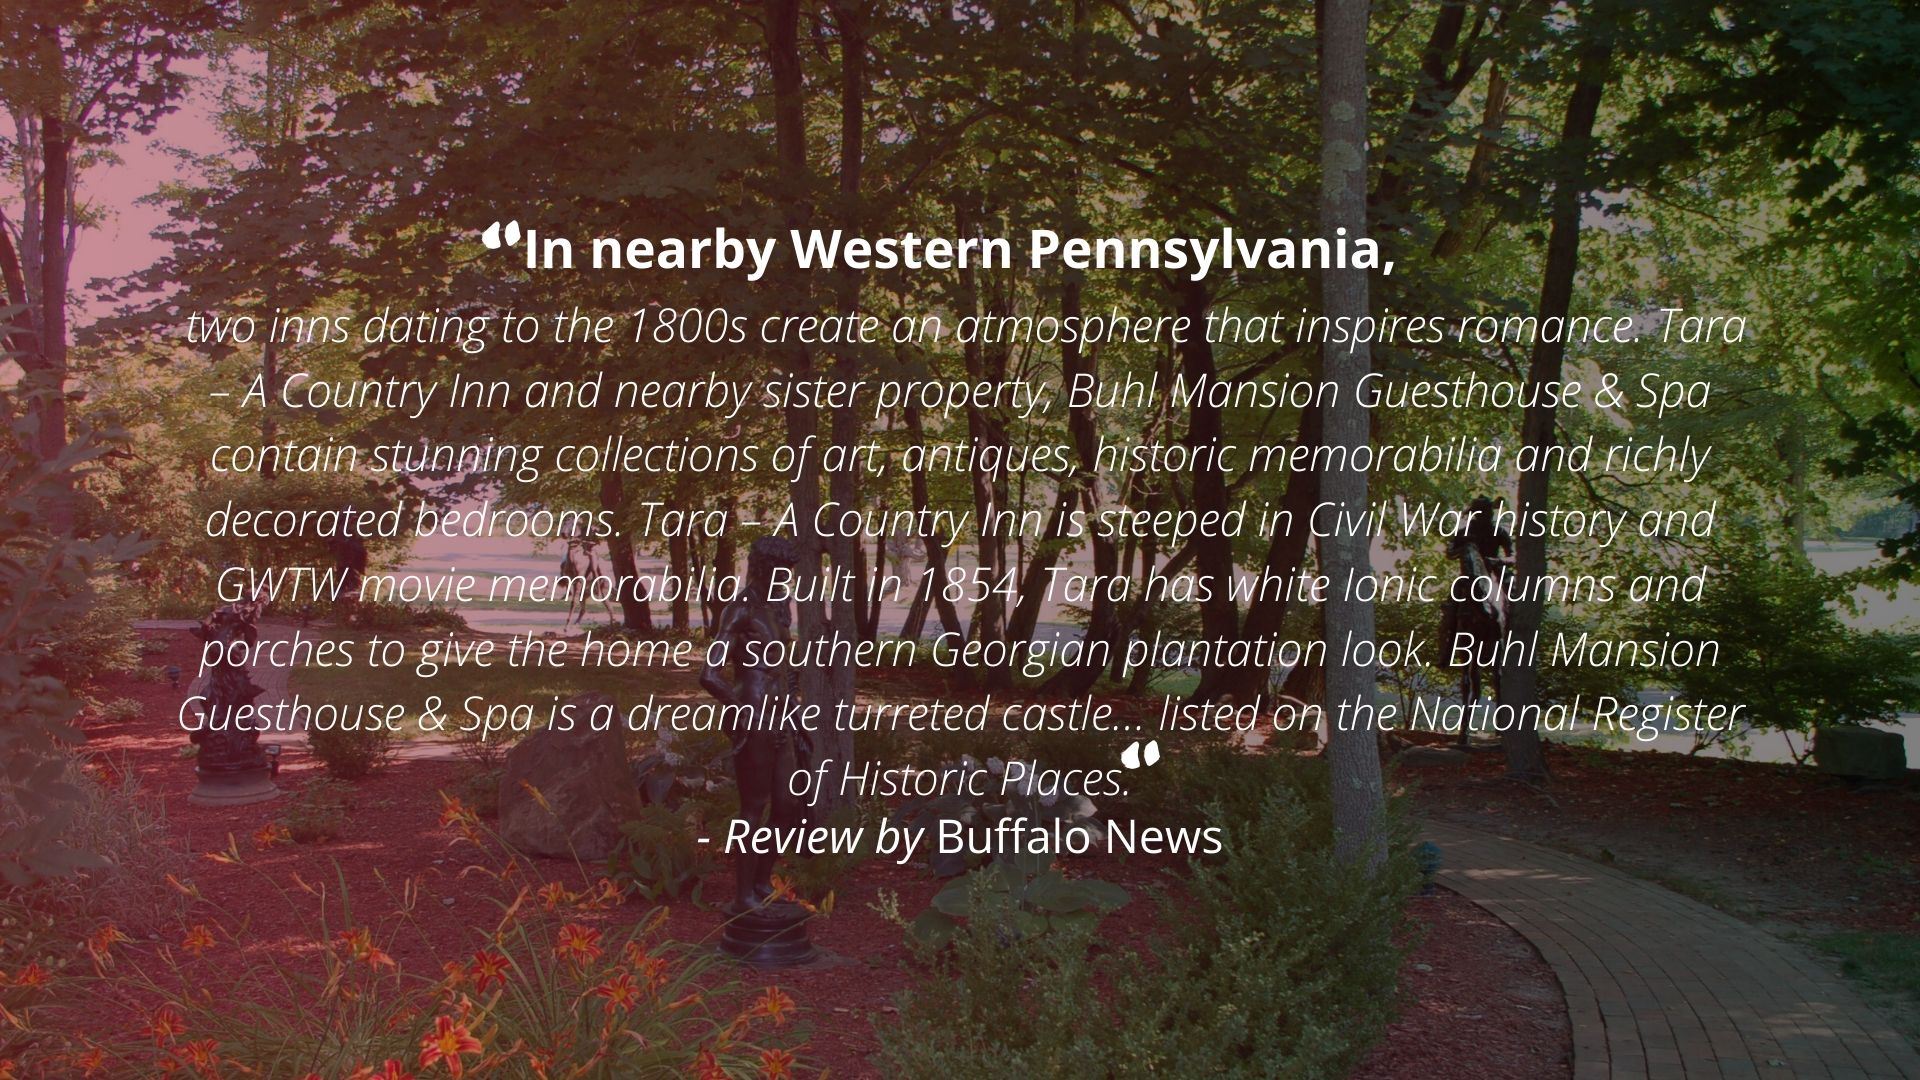 "In nearby Western Pennsylvania, two inns dating to the 1800s create an atmosphere that inspires romance. Tara - A Country Inn and nearby sister property, Buhl Mansion Guesthouse & Spa contain stunning collections of art, antiques, historic memorabilia and richly decorated bedrooms. Tara - A Country Inn is steeped in Civil War history and GWTW movie memorabilia. Built in 2854, Tara has white Ionic columns and porches to give the home a southern Georgian plantation look. Buhl Mansion Guesthouse & Spa is a dreamlike turreted castle... listed on the National Register of Historic Places." - Review by Buffalo News